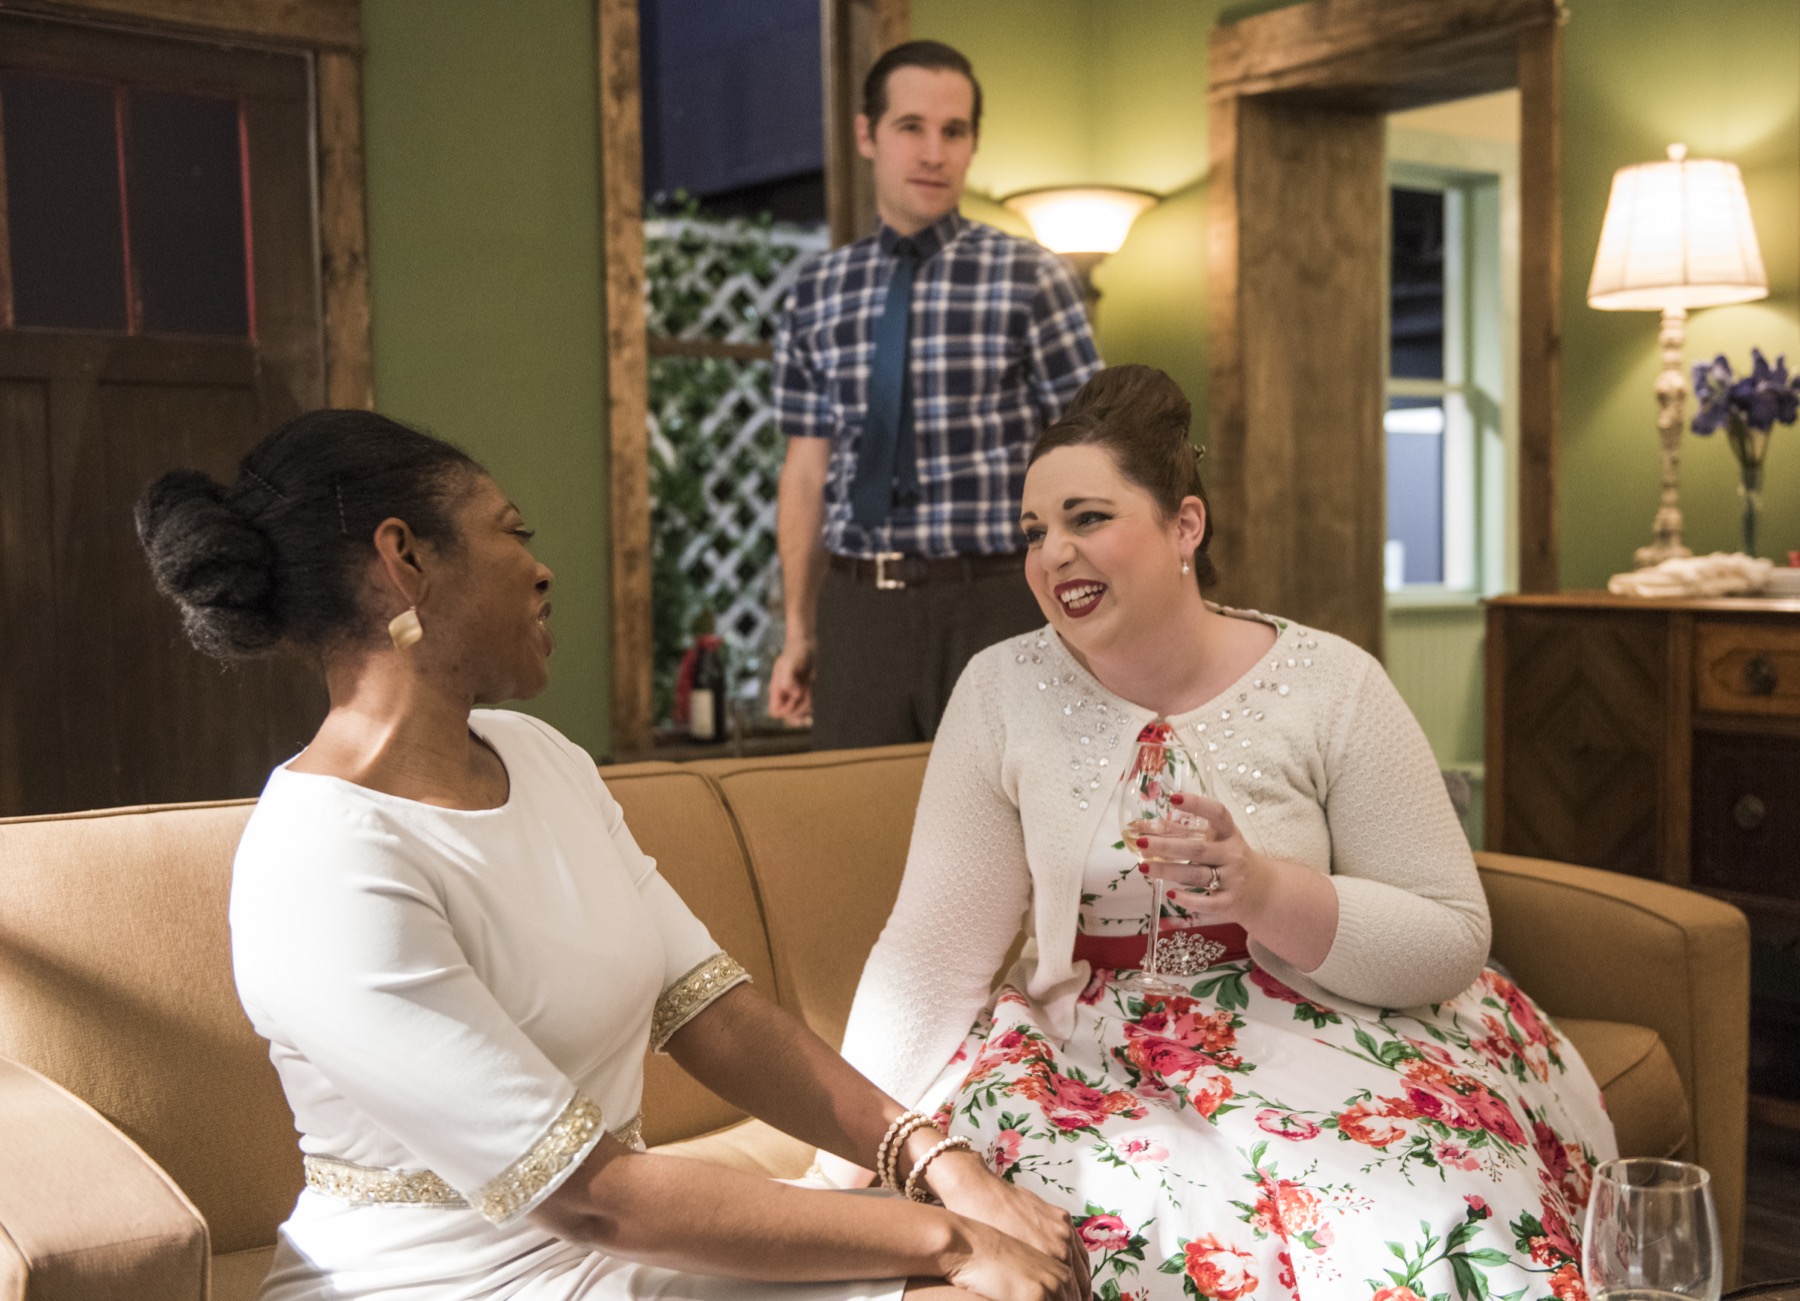 Arielle Leverett, Michael McKeough and Amy Malcom in Southern Gothic at Windy City Playhouse South